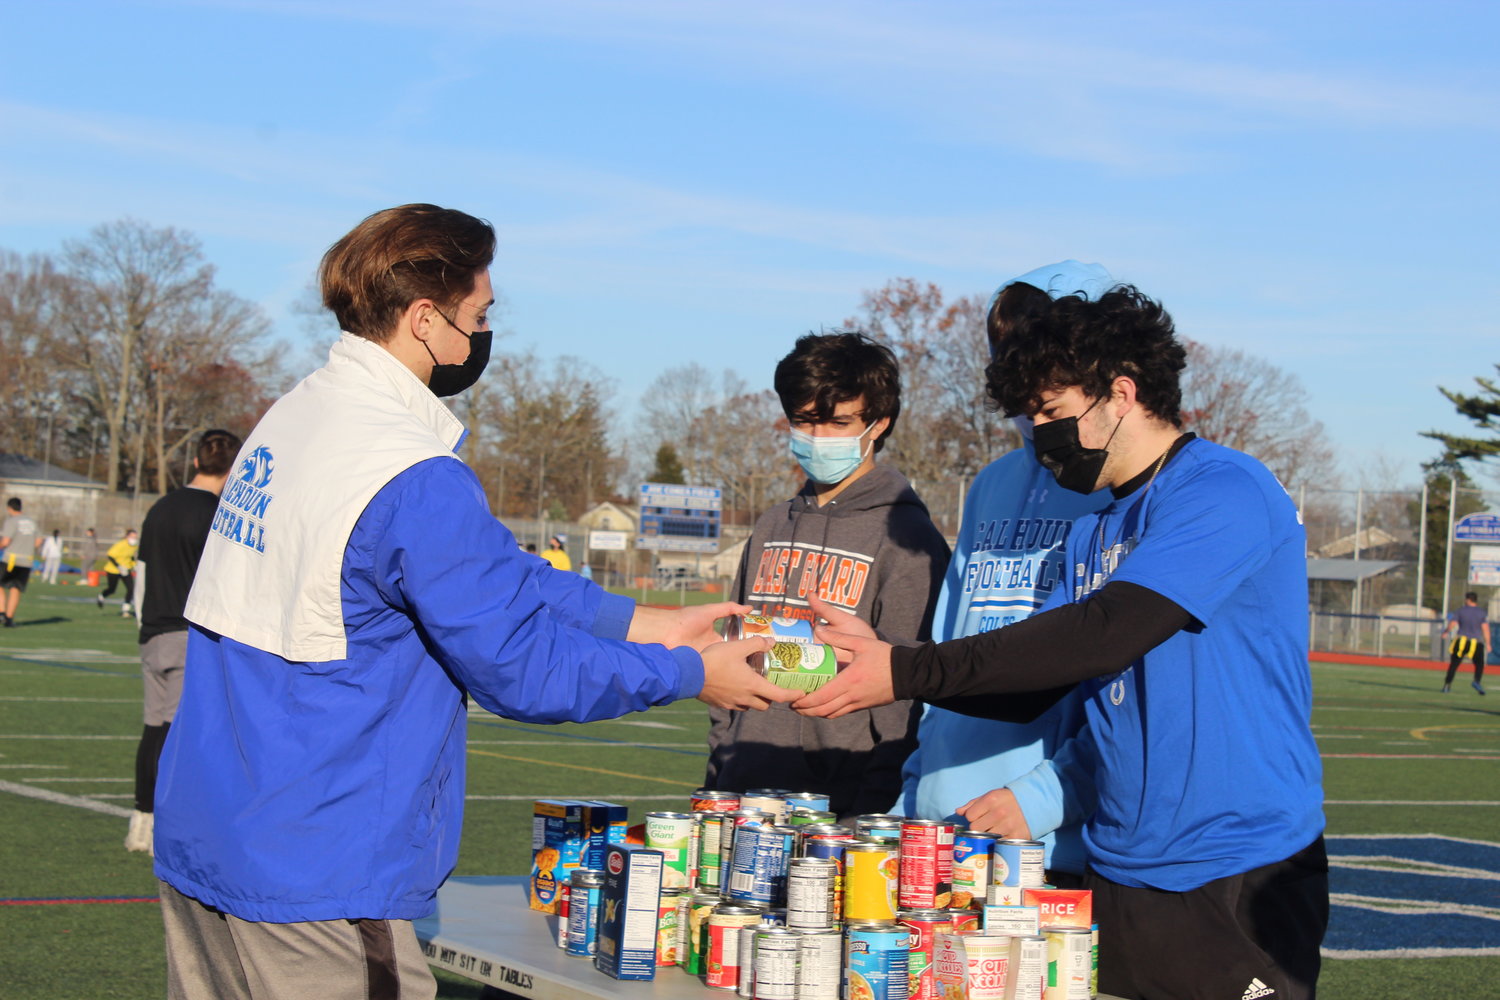 Each participant was required to donate two non-perishable food items as their entrance fee into the tournament, collecting more than 50 pounds of donations for the Community Cupboard.